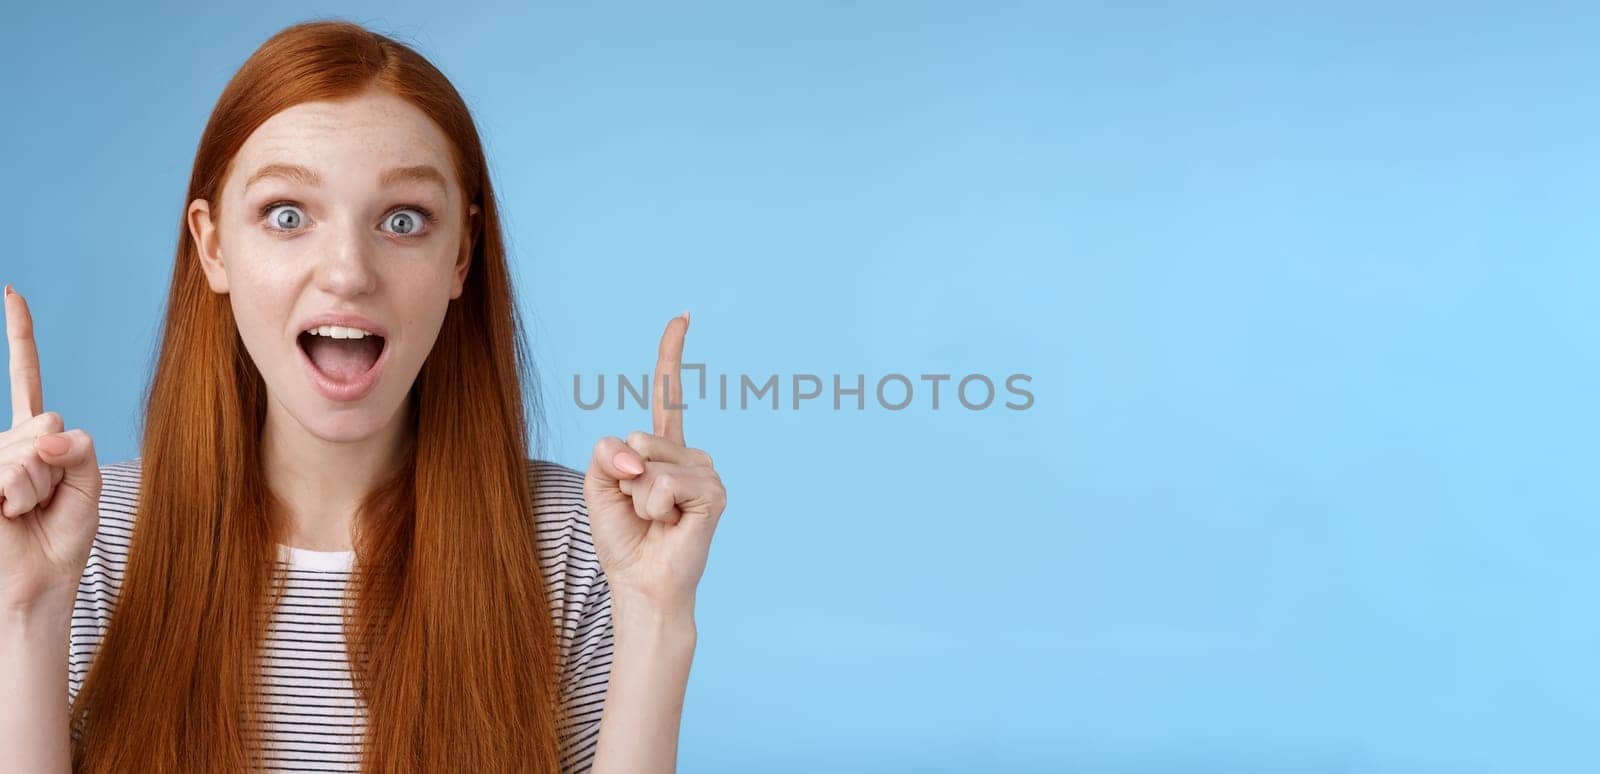 Surprised happy enthusiastic young redhead woman reacting impressed upper hanging promo pointing up index fingers drop jaw amused look thrilled camera telling about awesome offer, blue background.